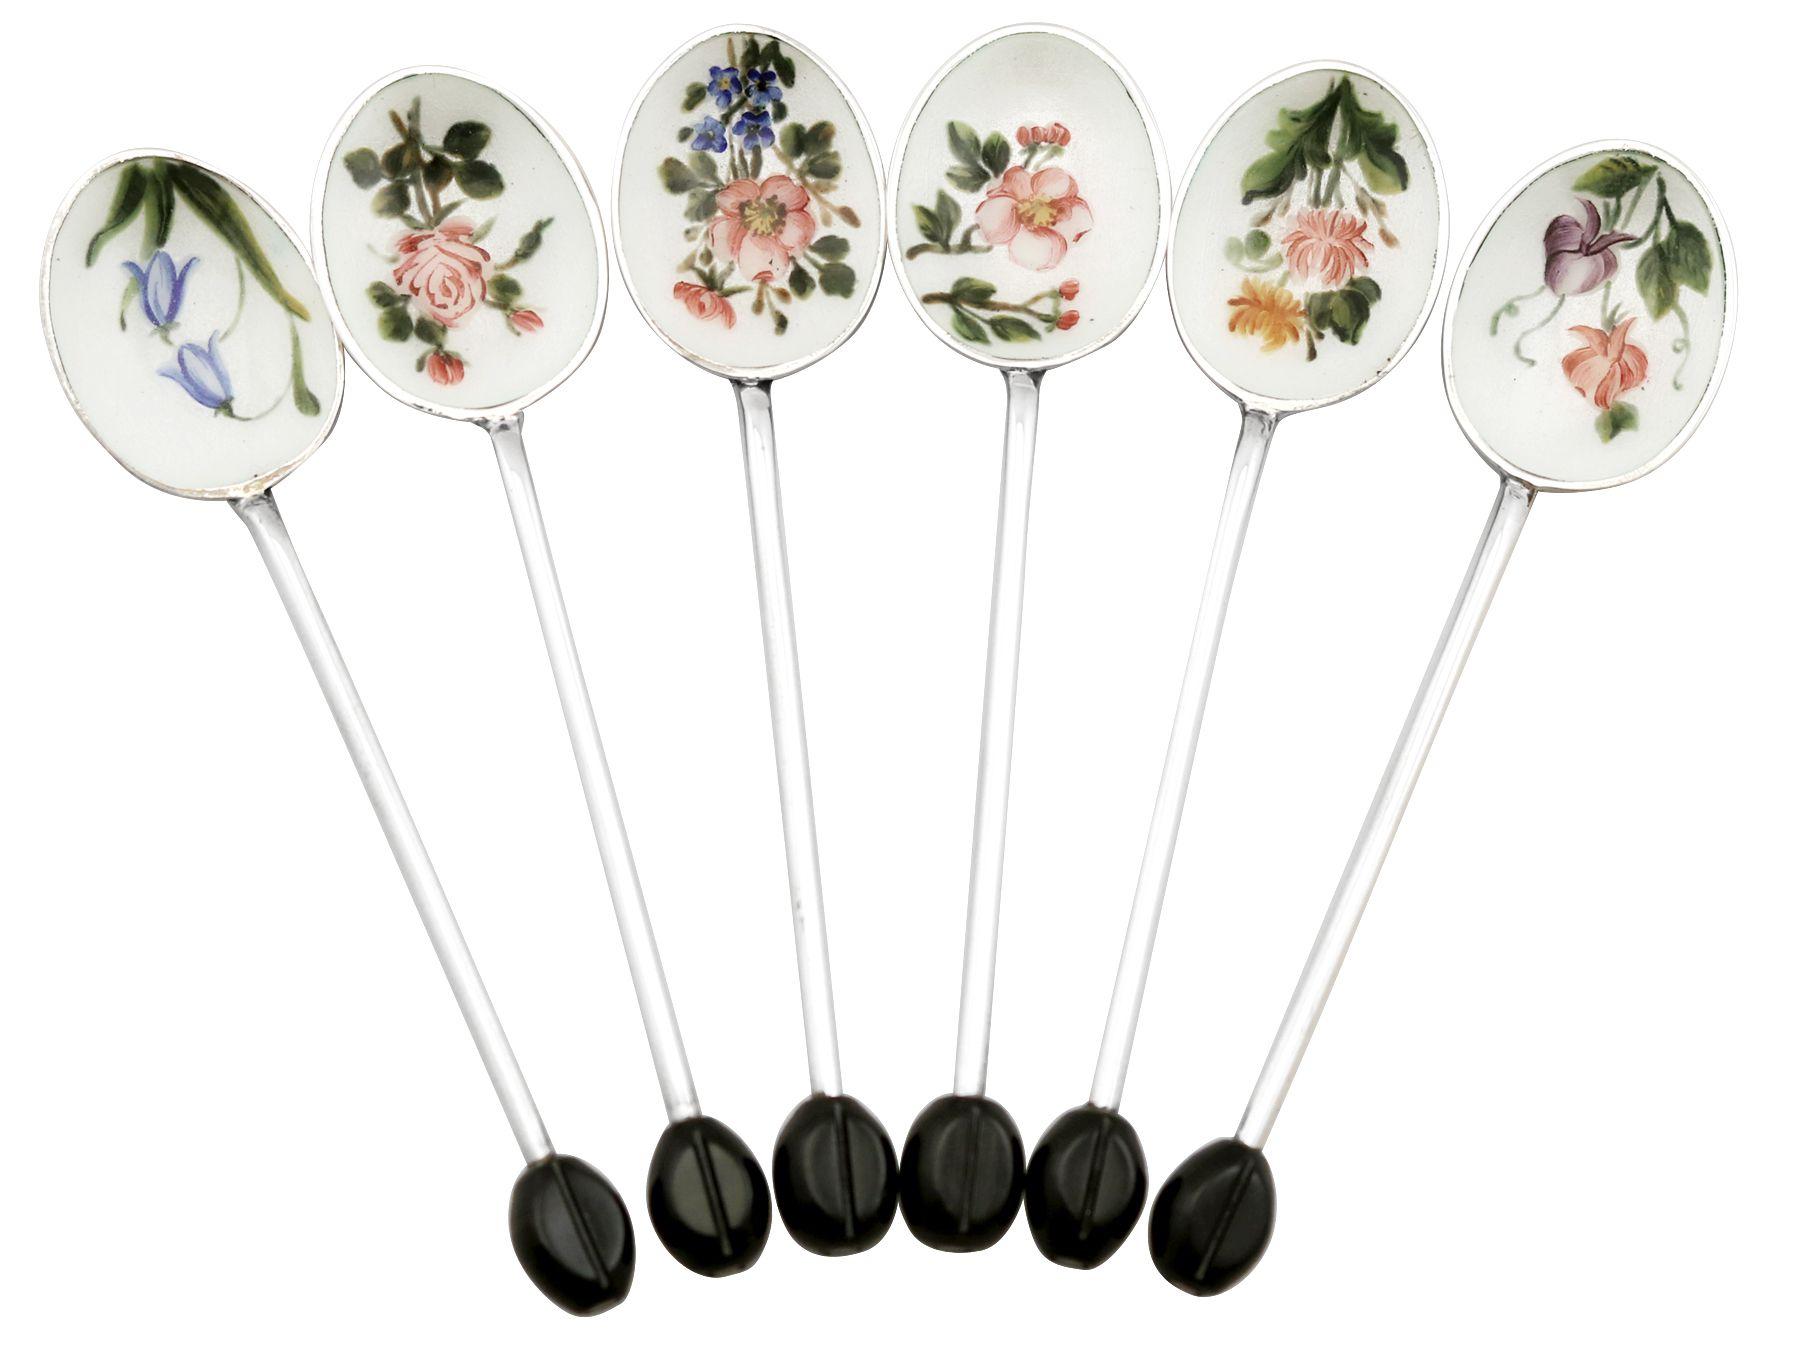 A fine and impressive set of six vintage Elizabeth II English sterling silver and enamel coffee bean spoons; an addition to our silver teaware collection

These fine vintage Elizabeth II English sterling silver and enamel coffee bean spoons have a